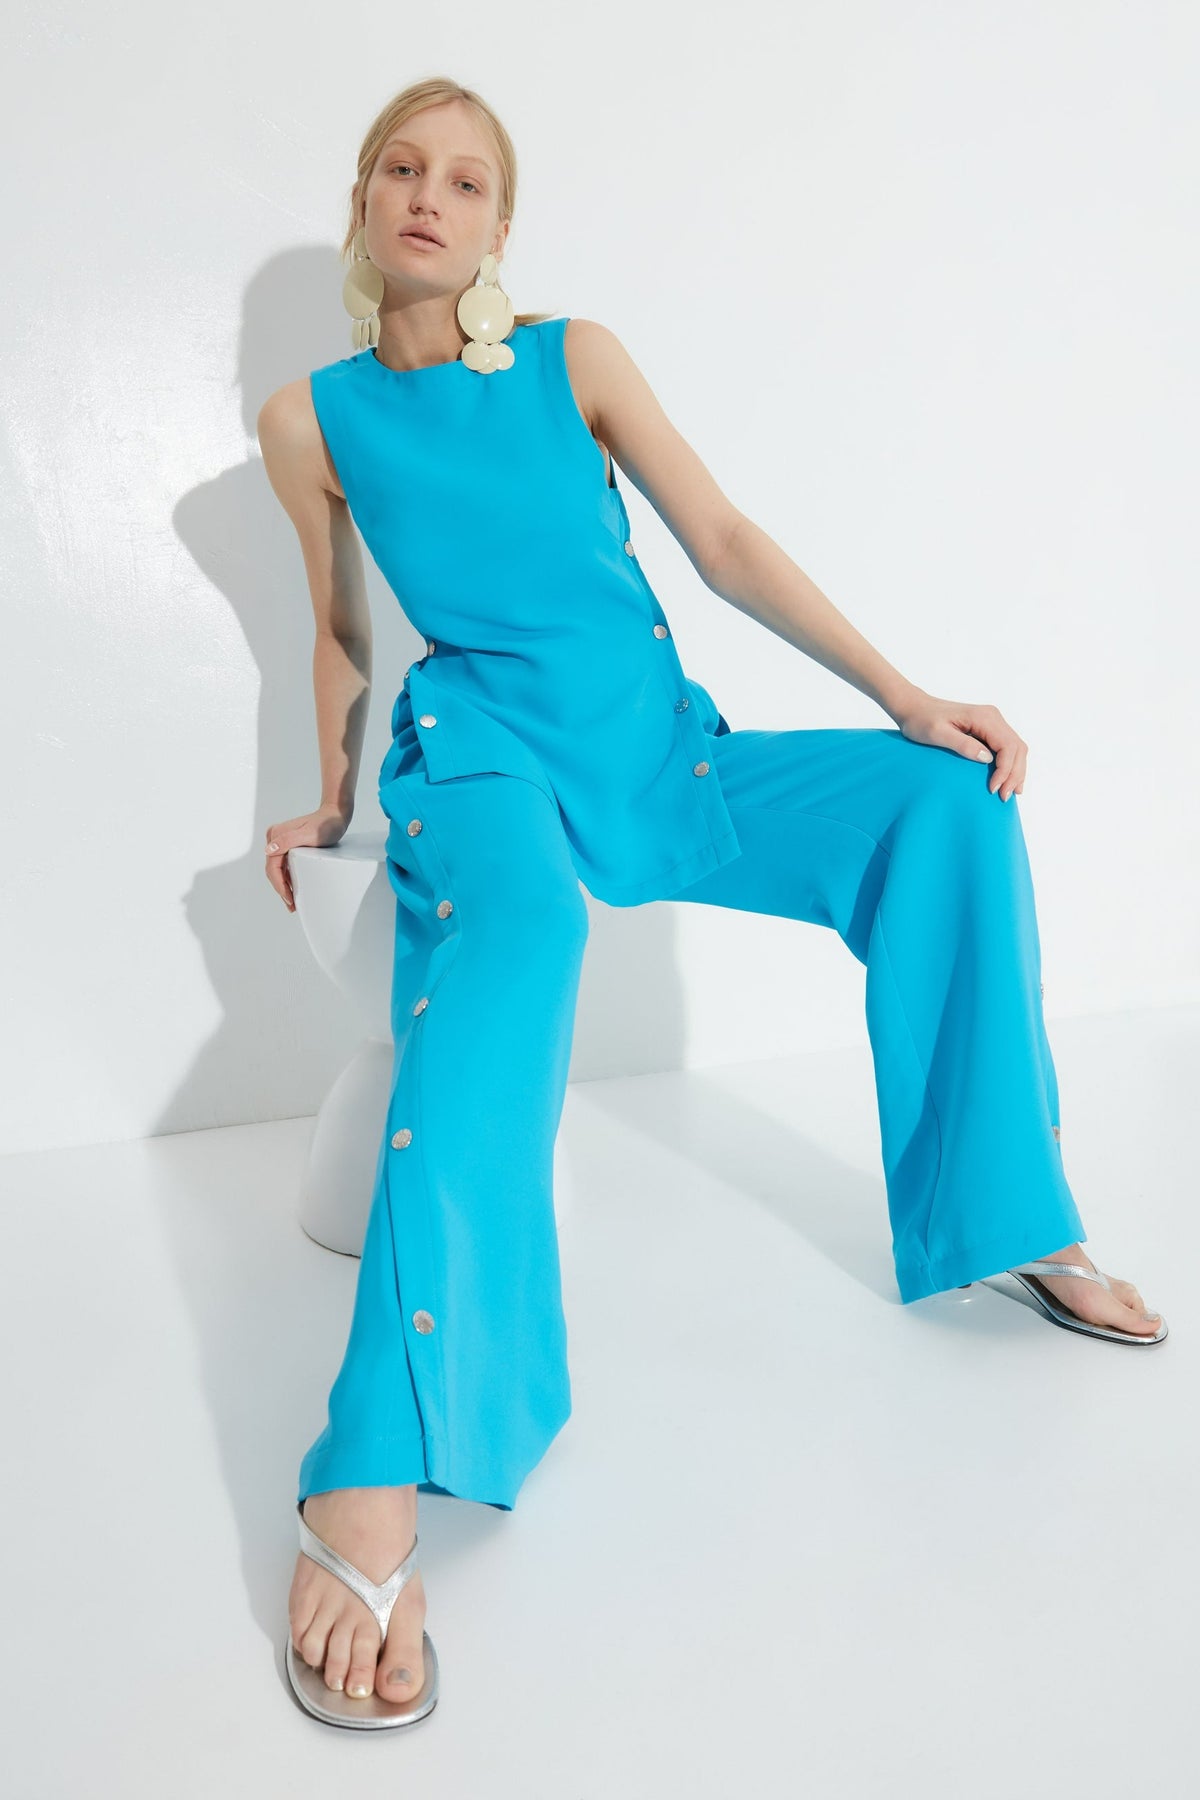 Zweeny Crepe Pant in Blue Lagoon